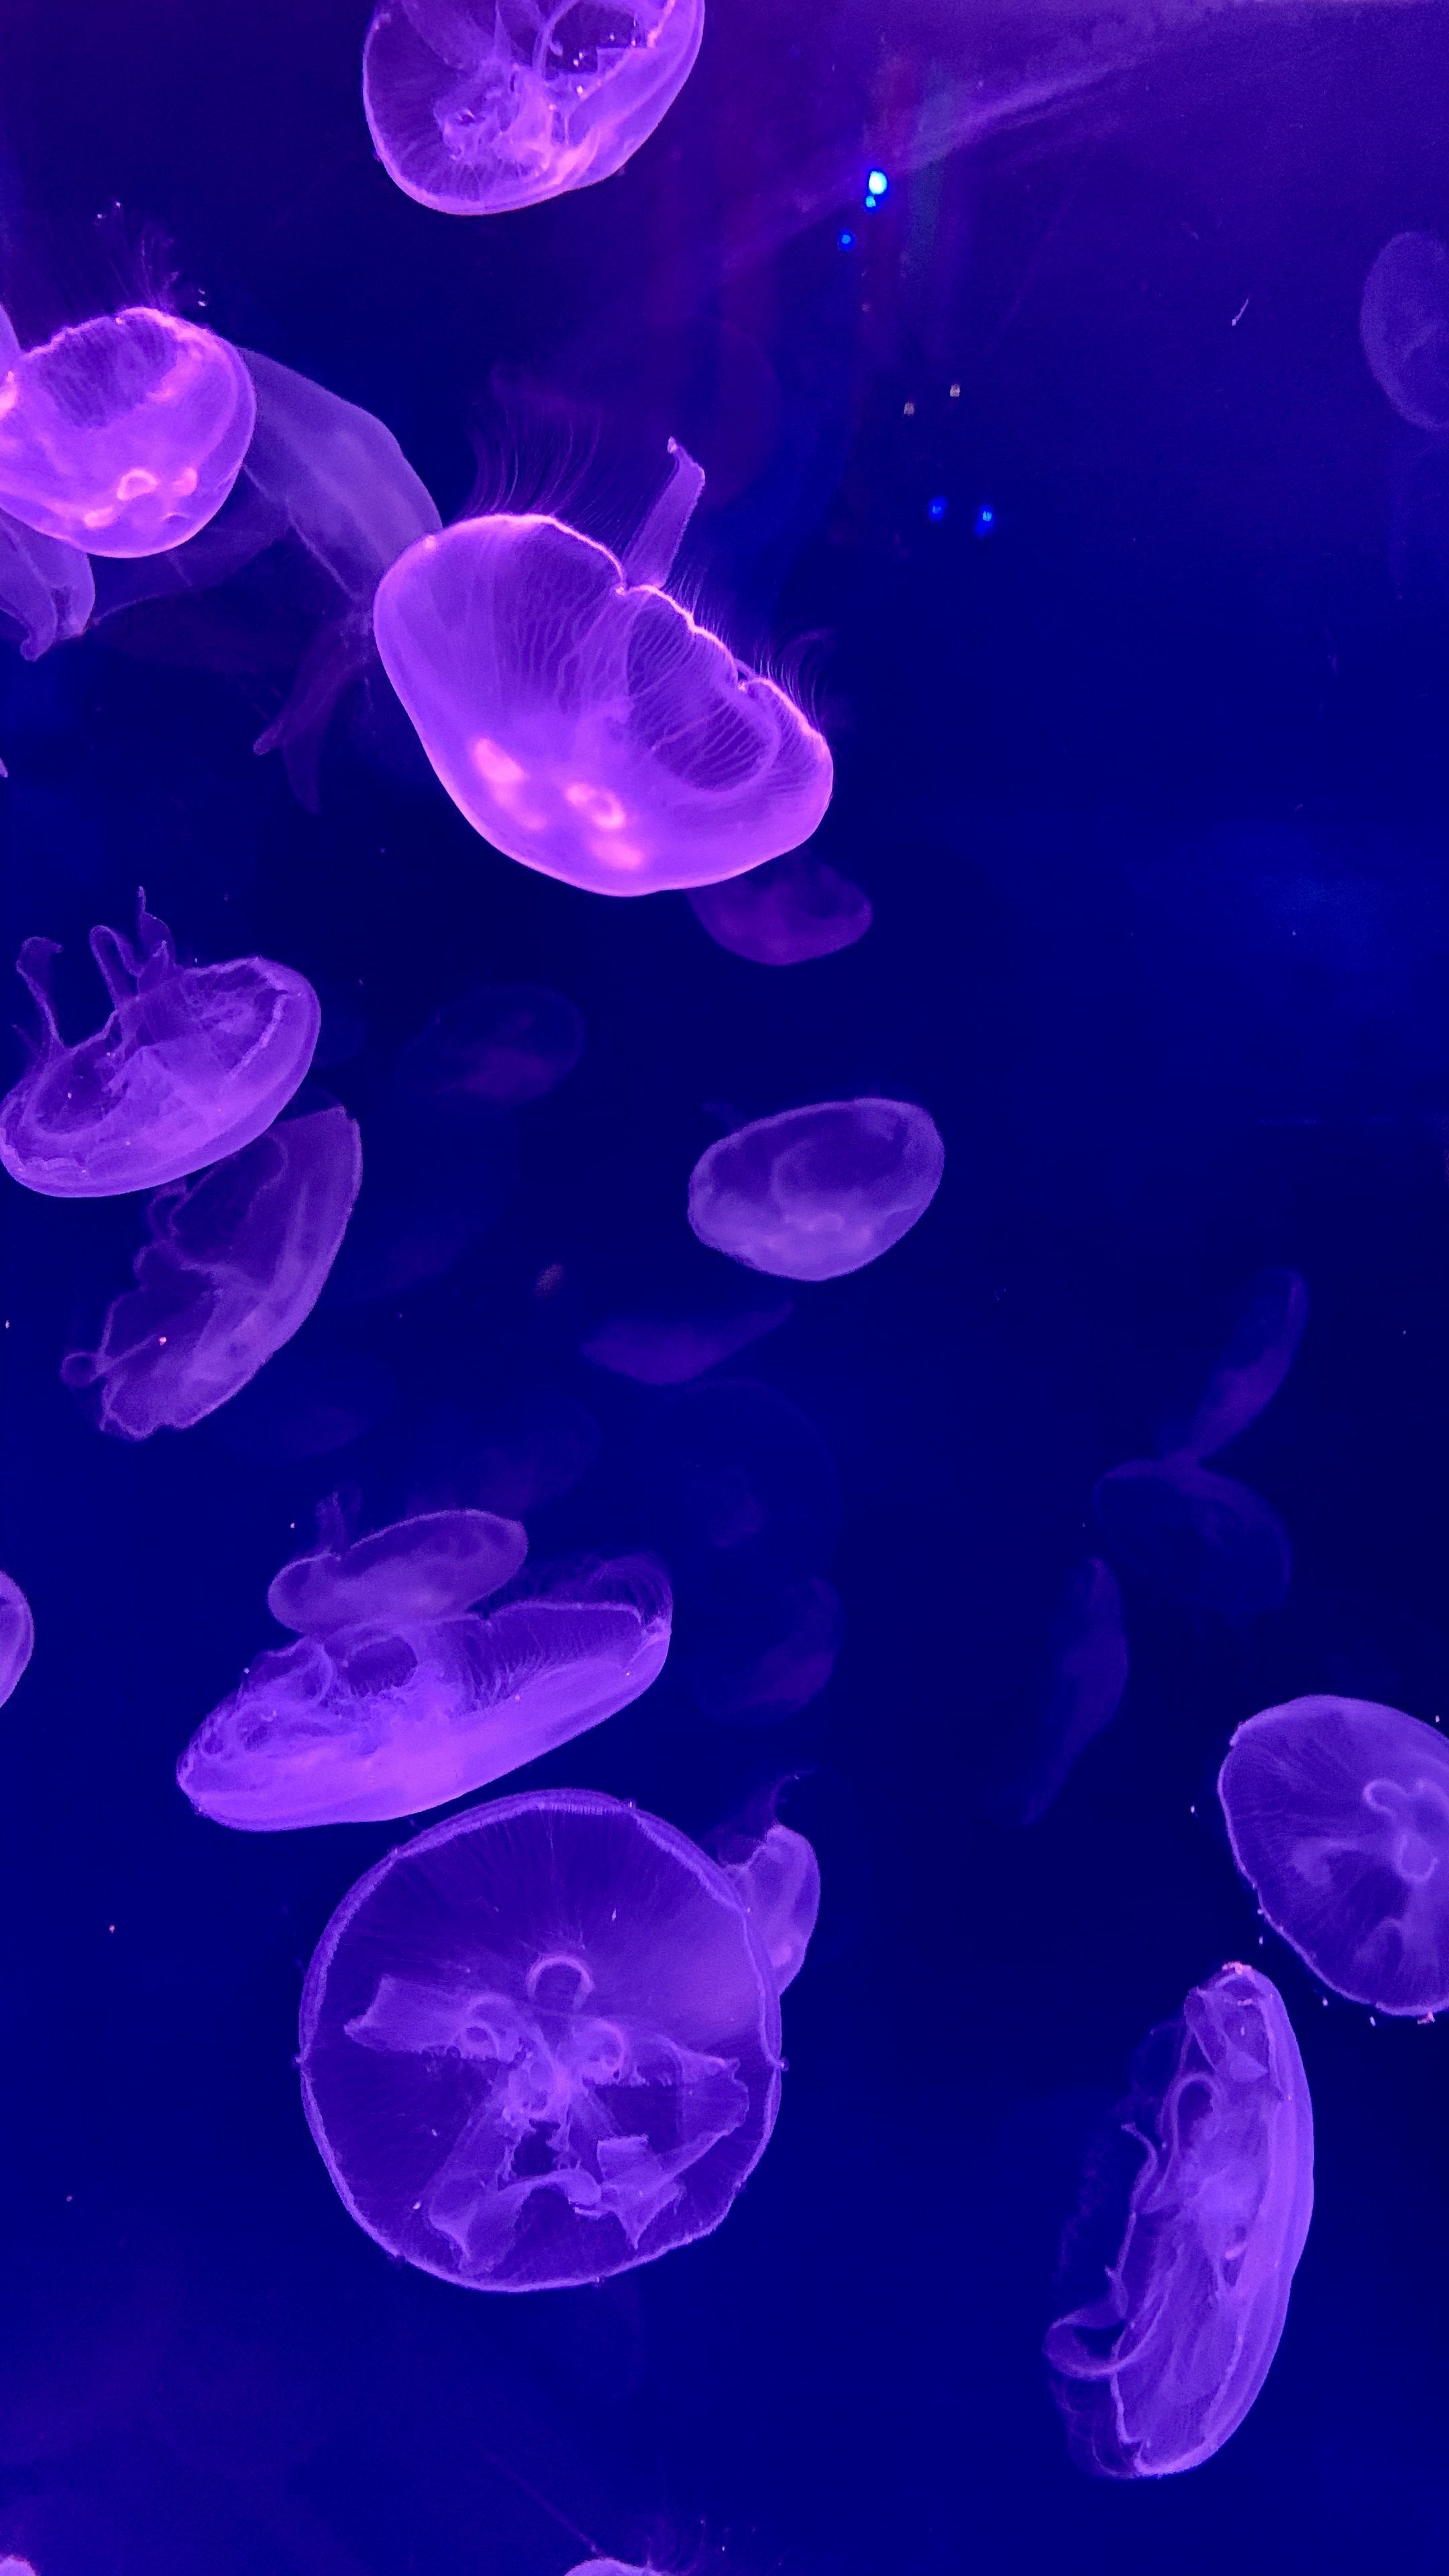 A group of jellyfish swimming in a blue tank. - Underwater